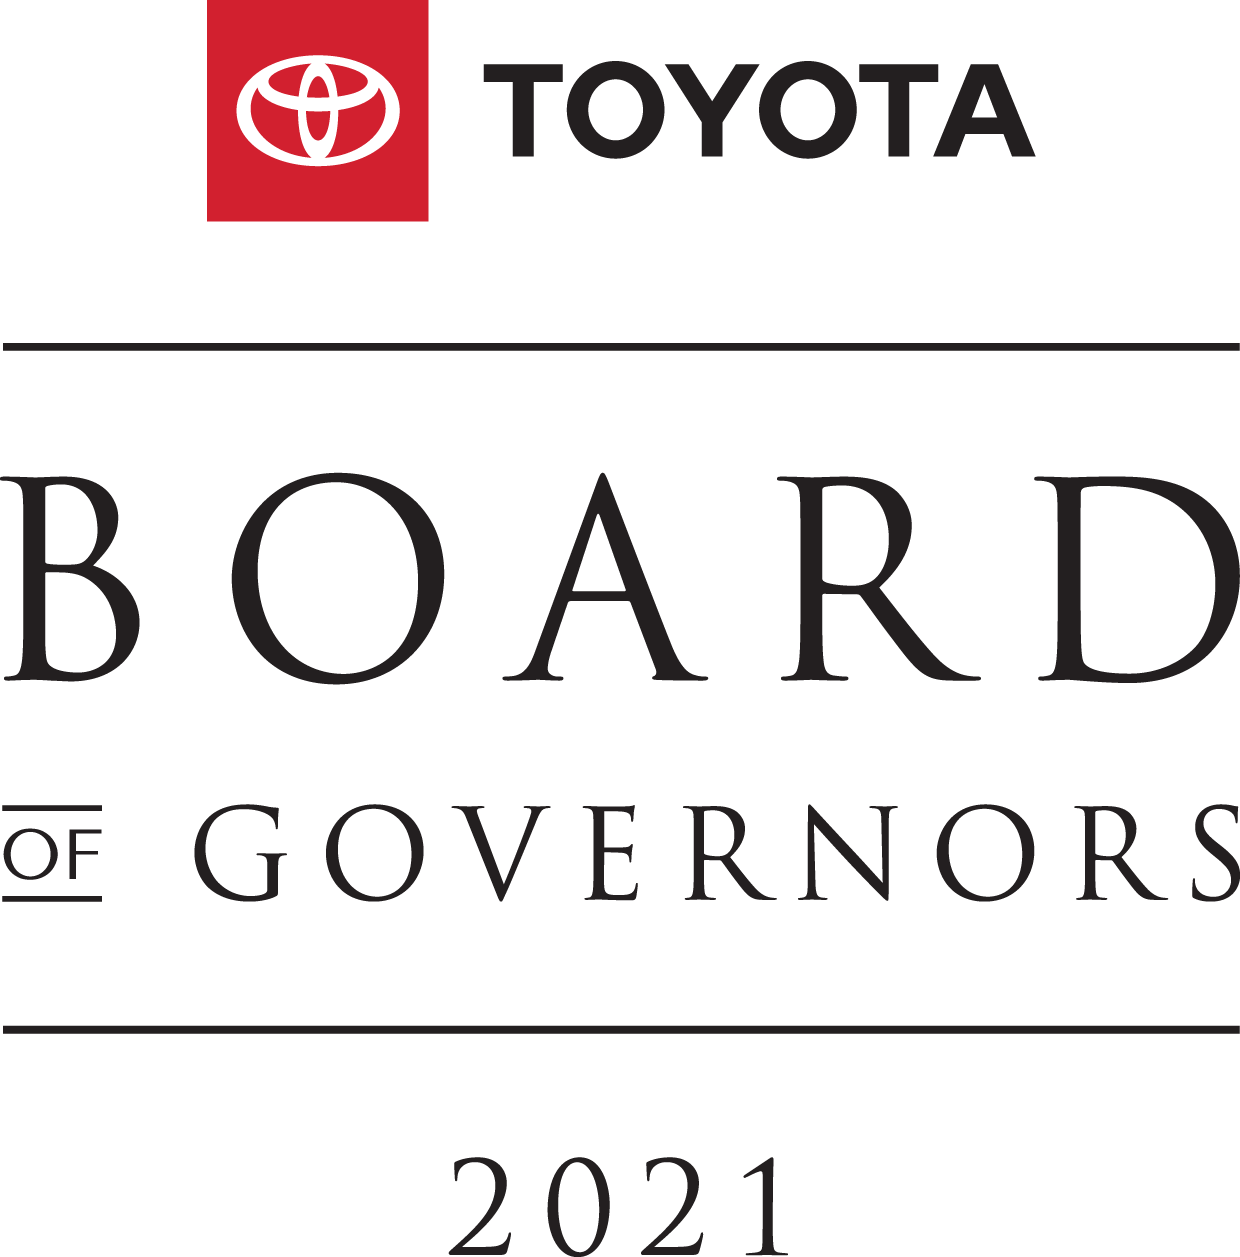 Toyota Board of Governors 2021